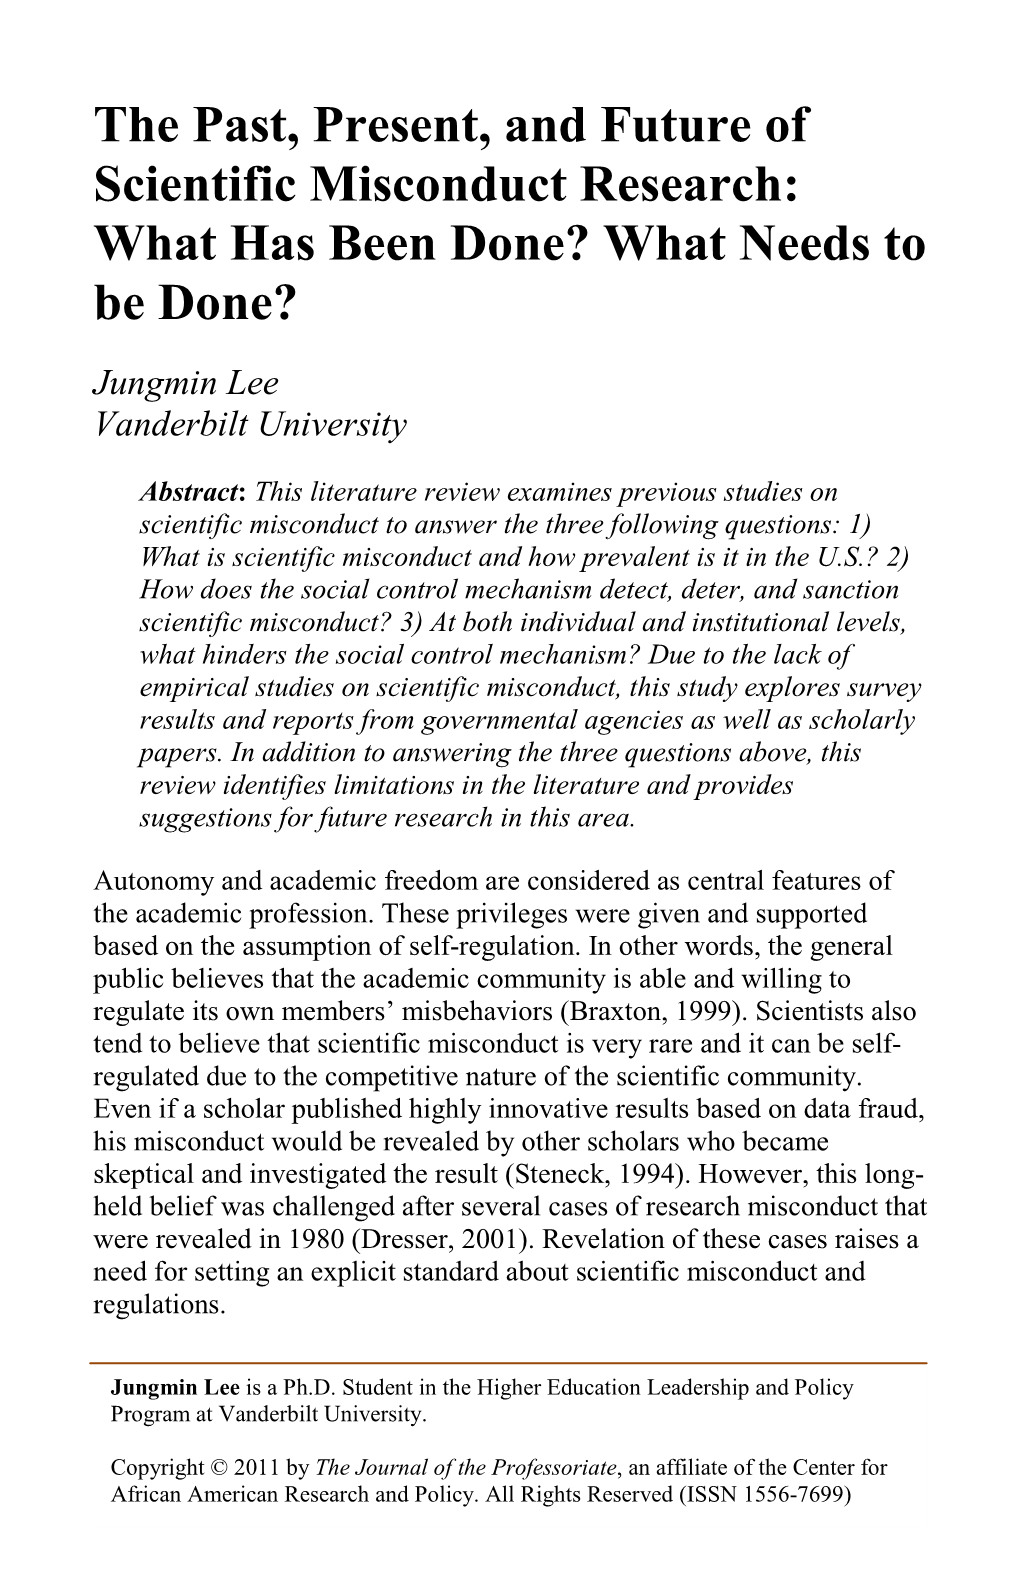 The Past, Present, and Future of Scientific Misconduct Research: What Has Been Done? What Needs to Be Done? Jungmin Lee Vanderbilt University